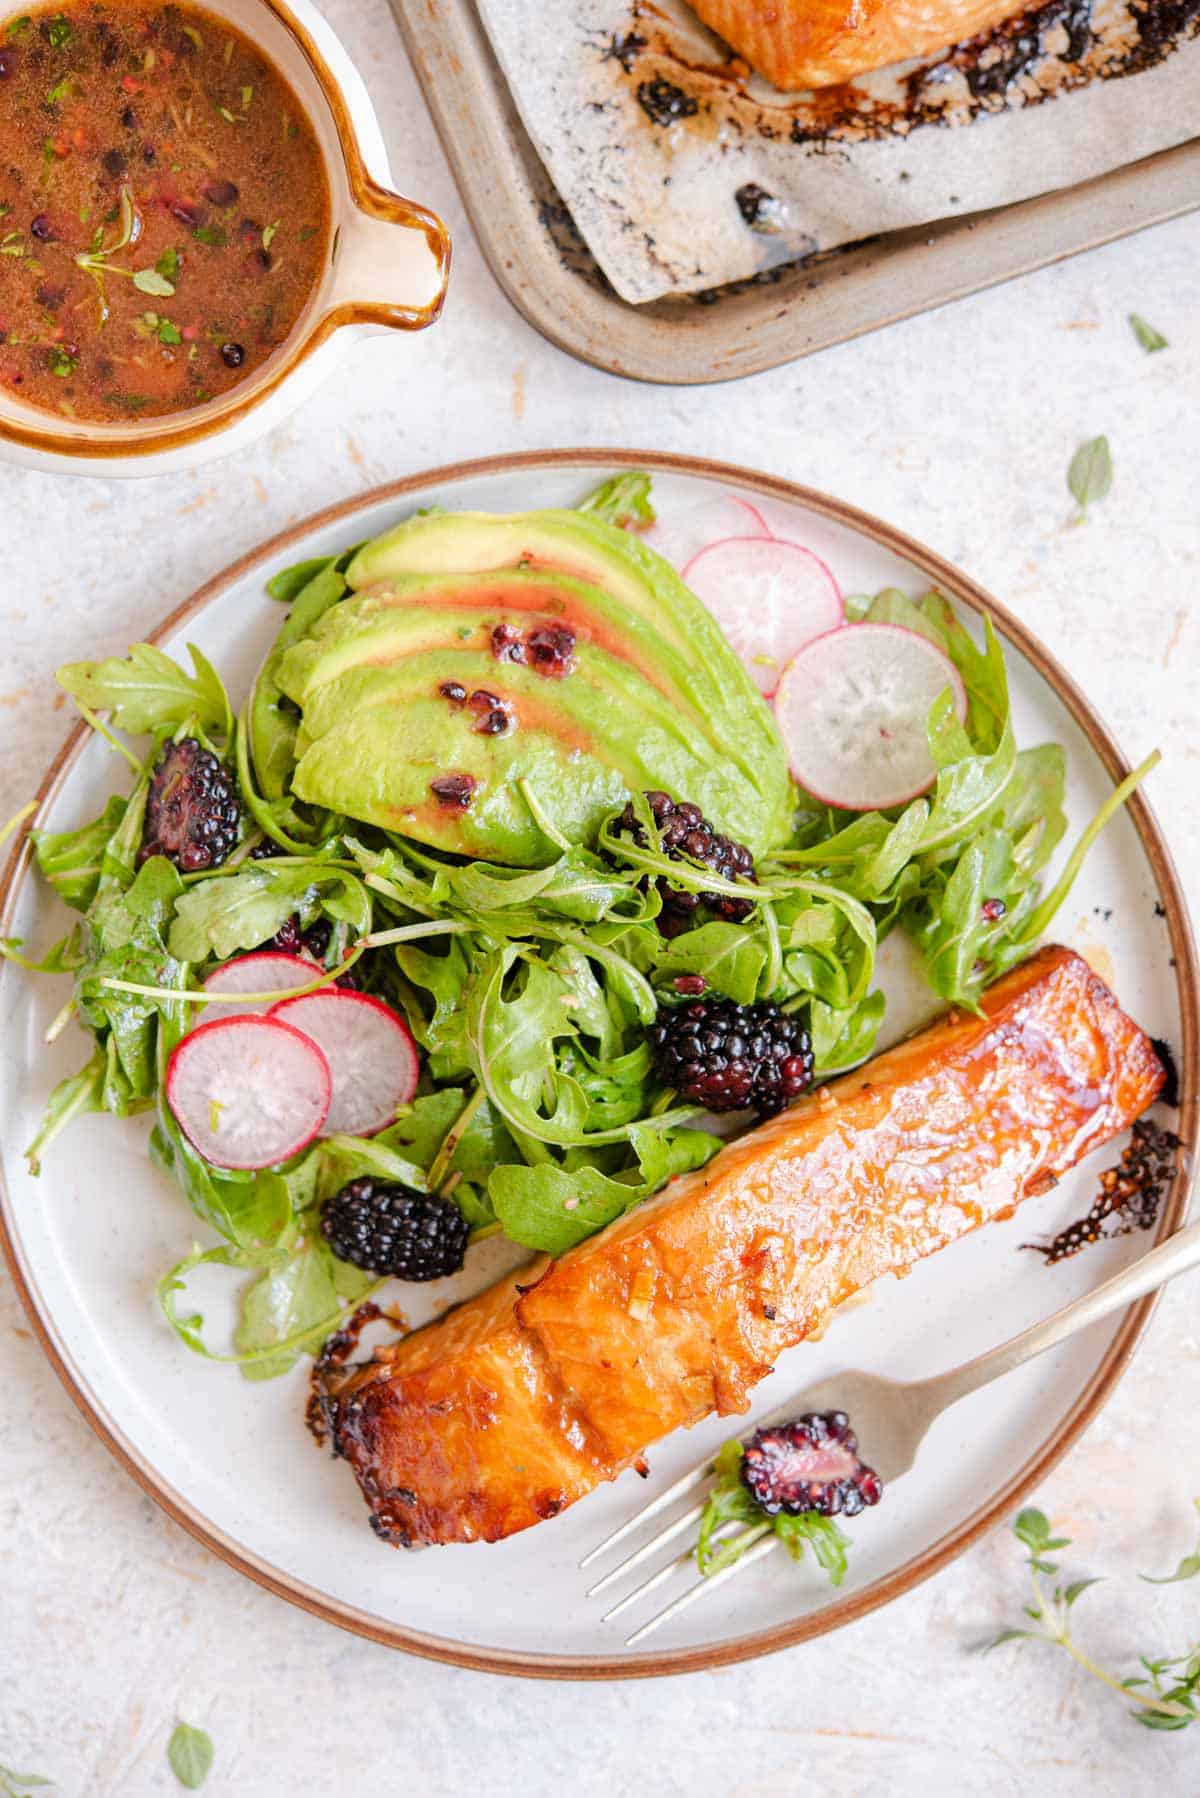 An overhead shot of glazed salmon on a plate with salad